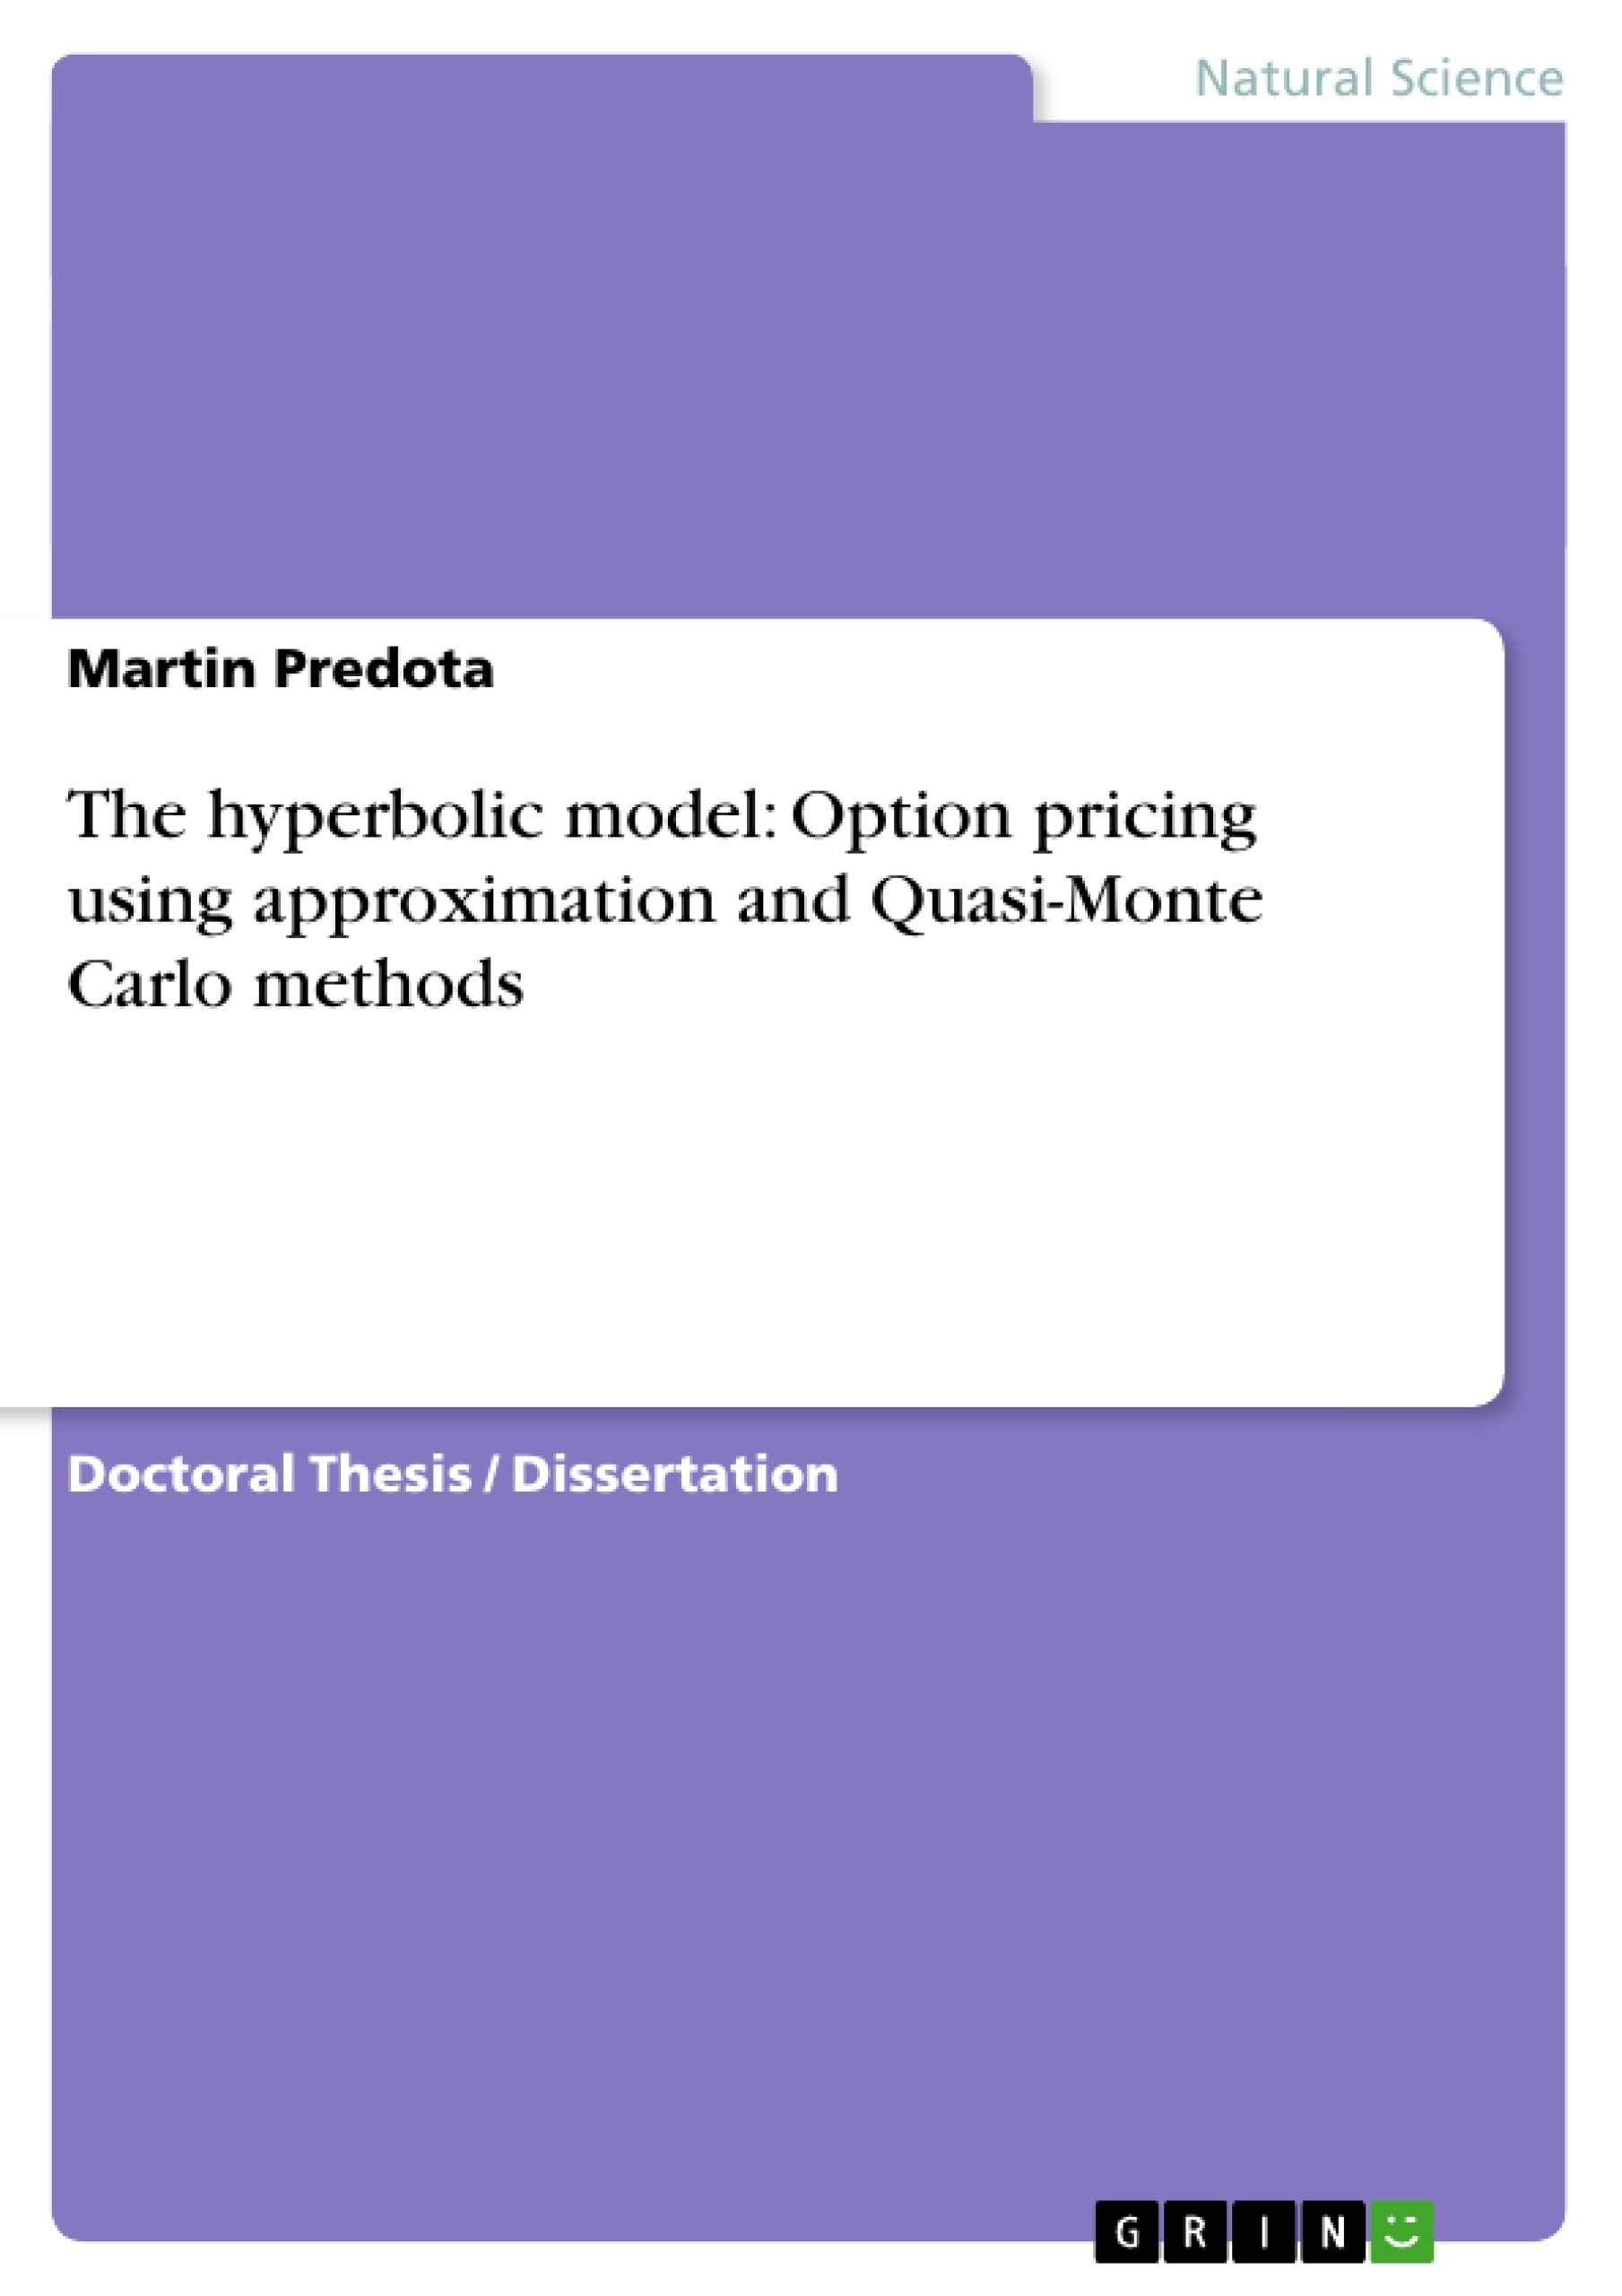 Titre: The hyperbolic model: Option pricing using approximation and Quasi-Monte Carlo methods